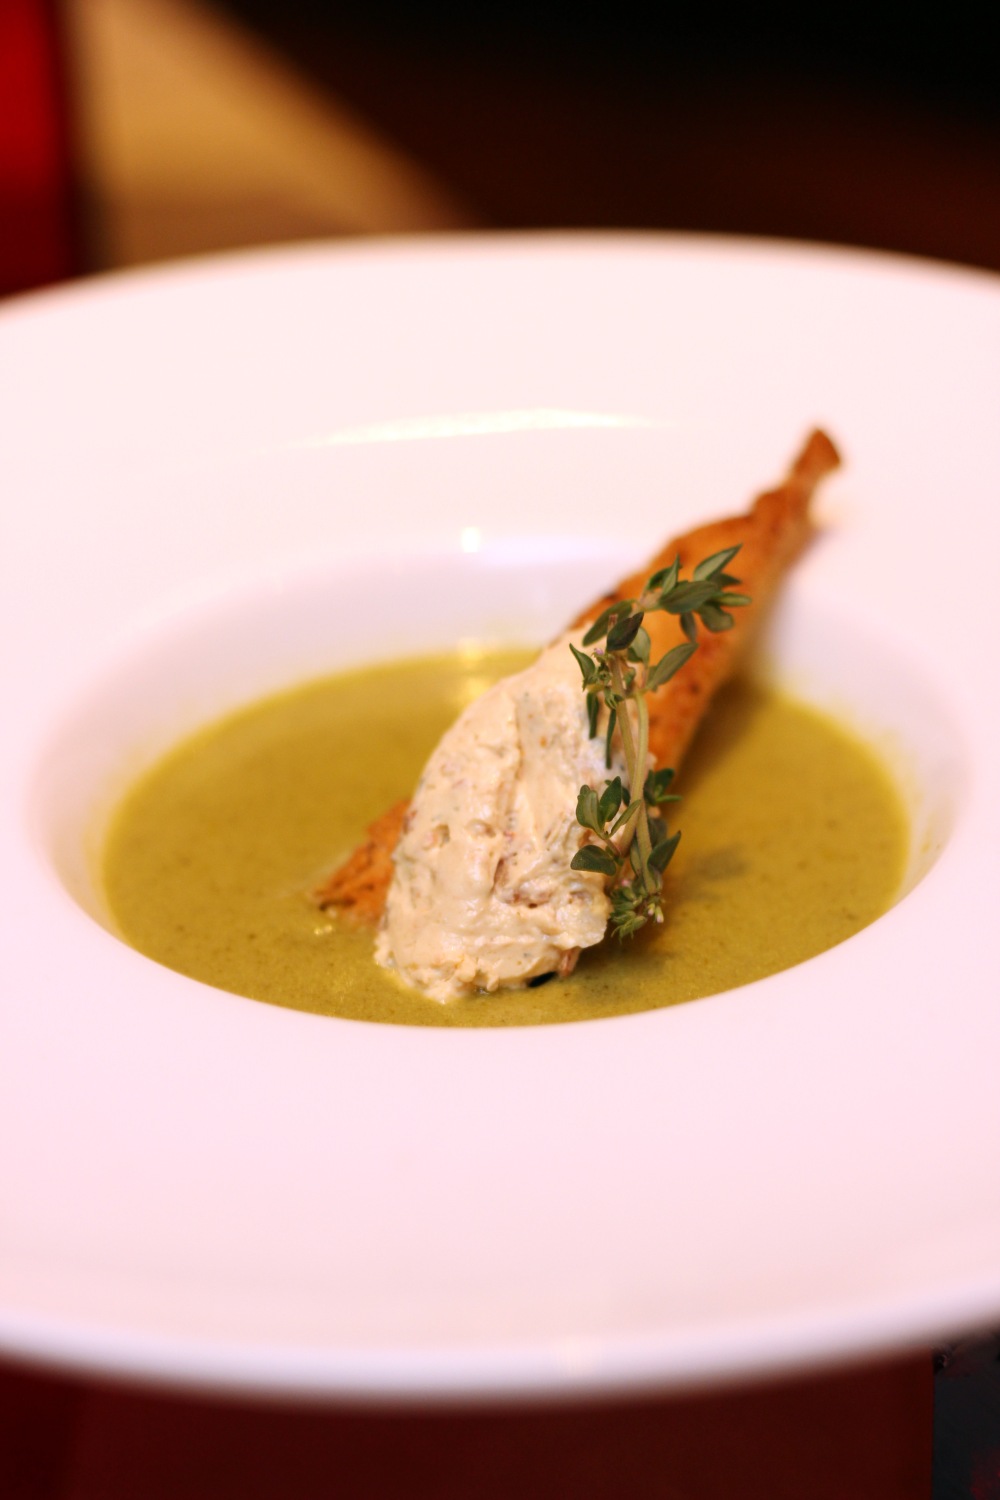 Watercress and Soya Milk Soup with Sundried Tomato Nougat